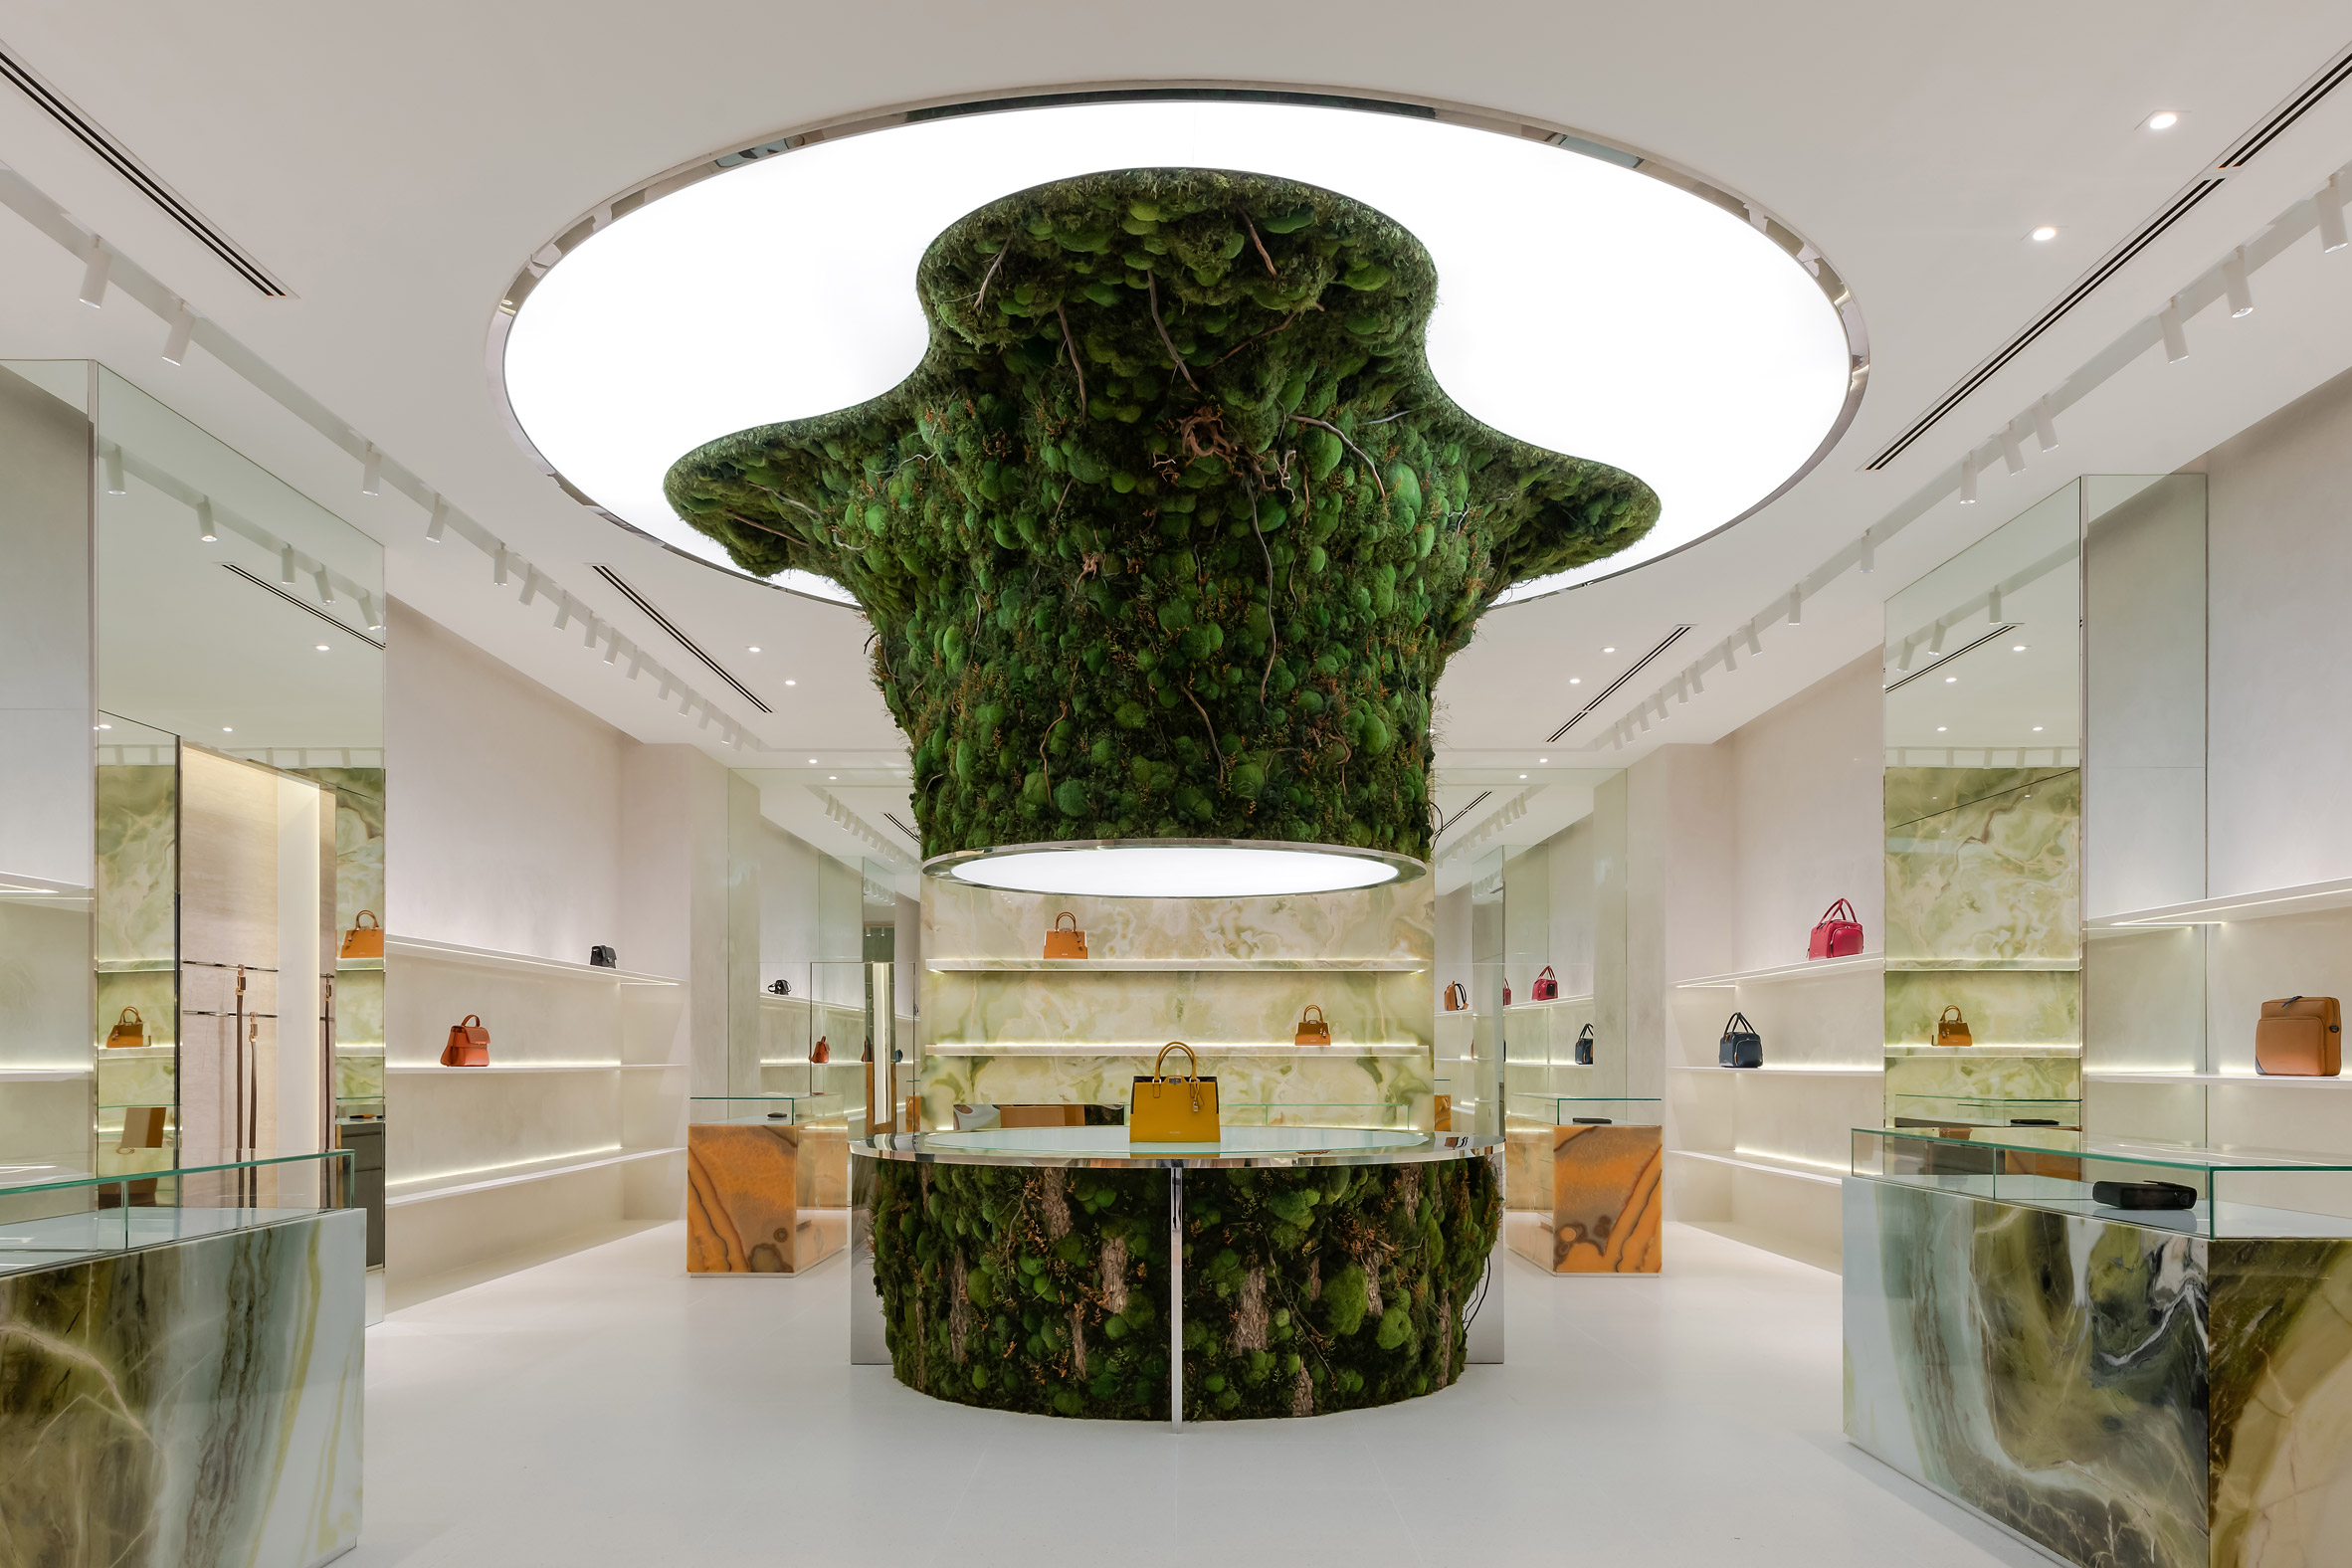 Louis Vuitton unveils a new look at The - The Gardens Mall